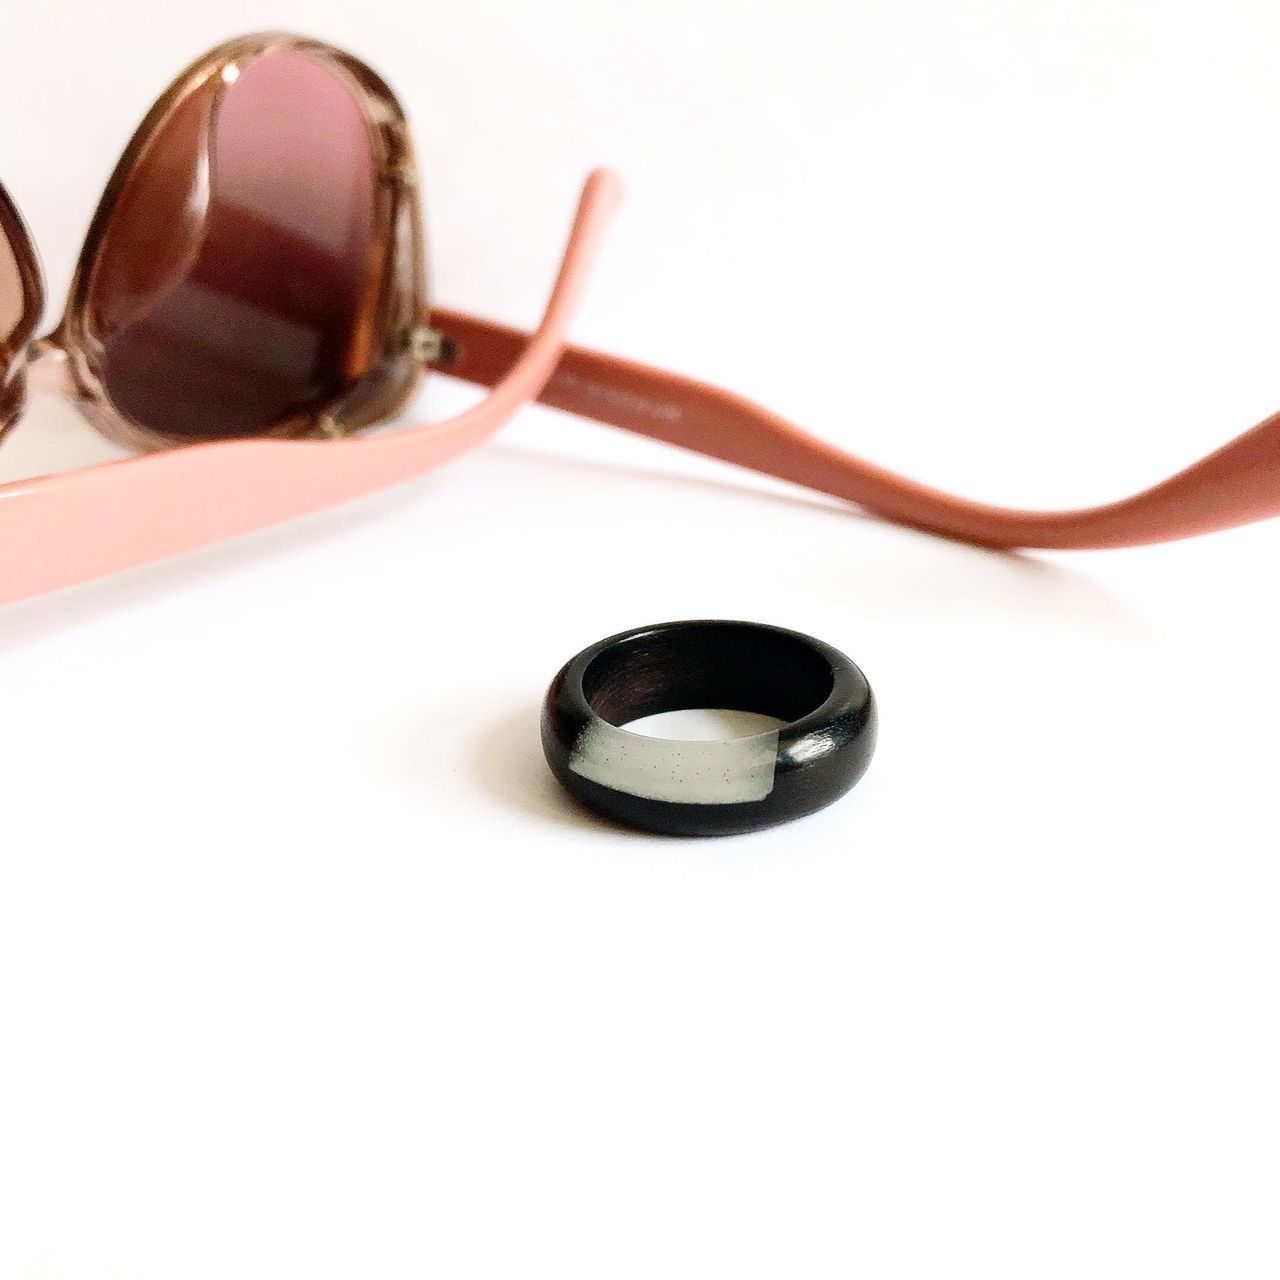 CLOSE-UP OF SUNGLASSES ON TABLE